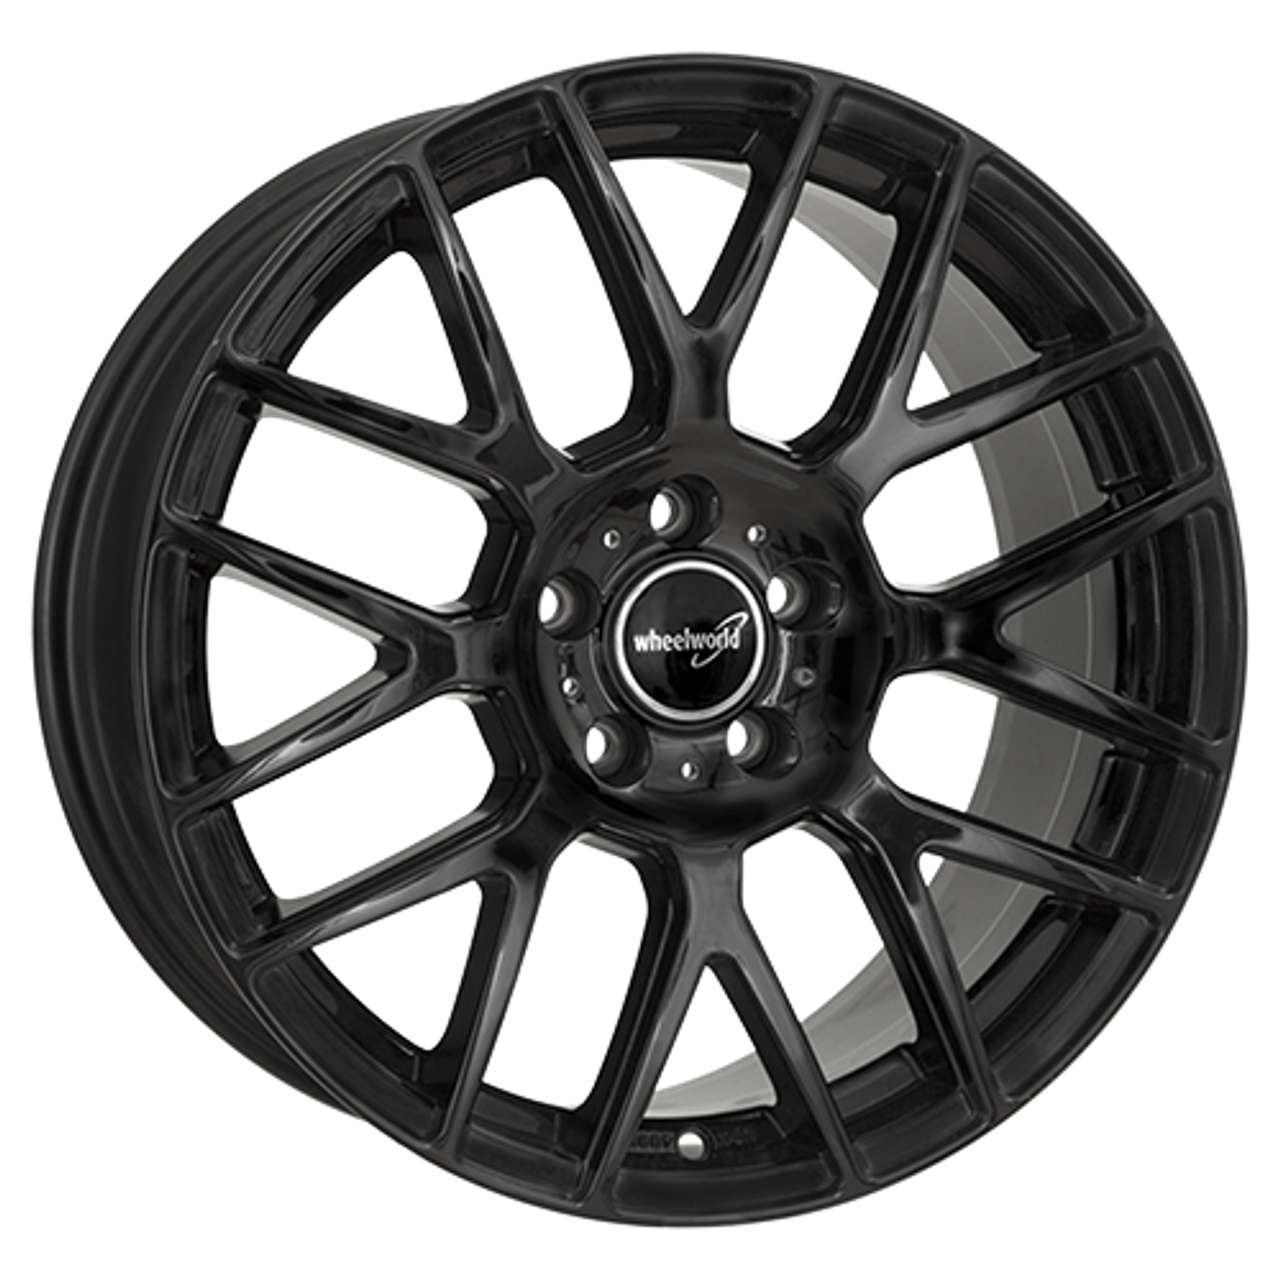 WHEELWORLD-2DRV WH26 black glossy painted 10.0Jx22 5x112 ET35